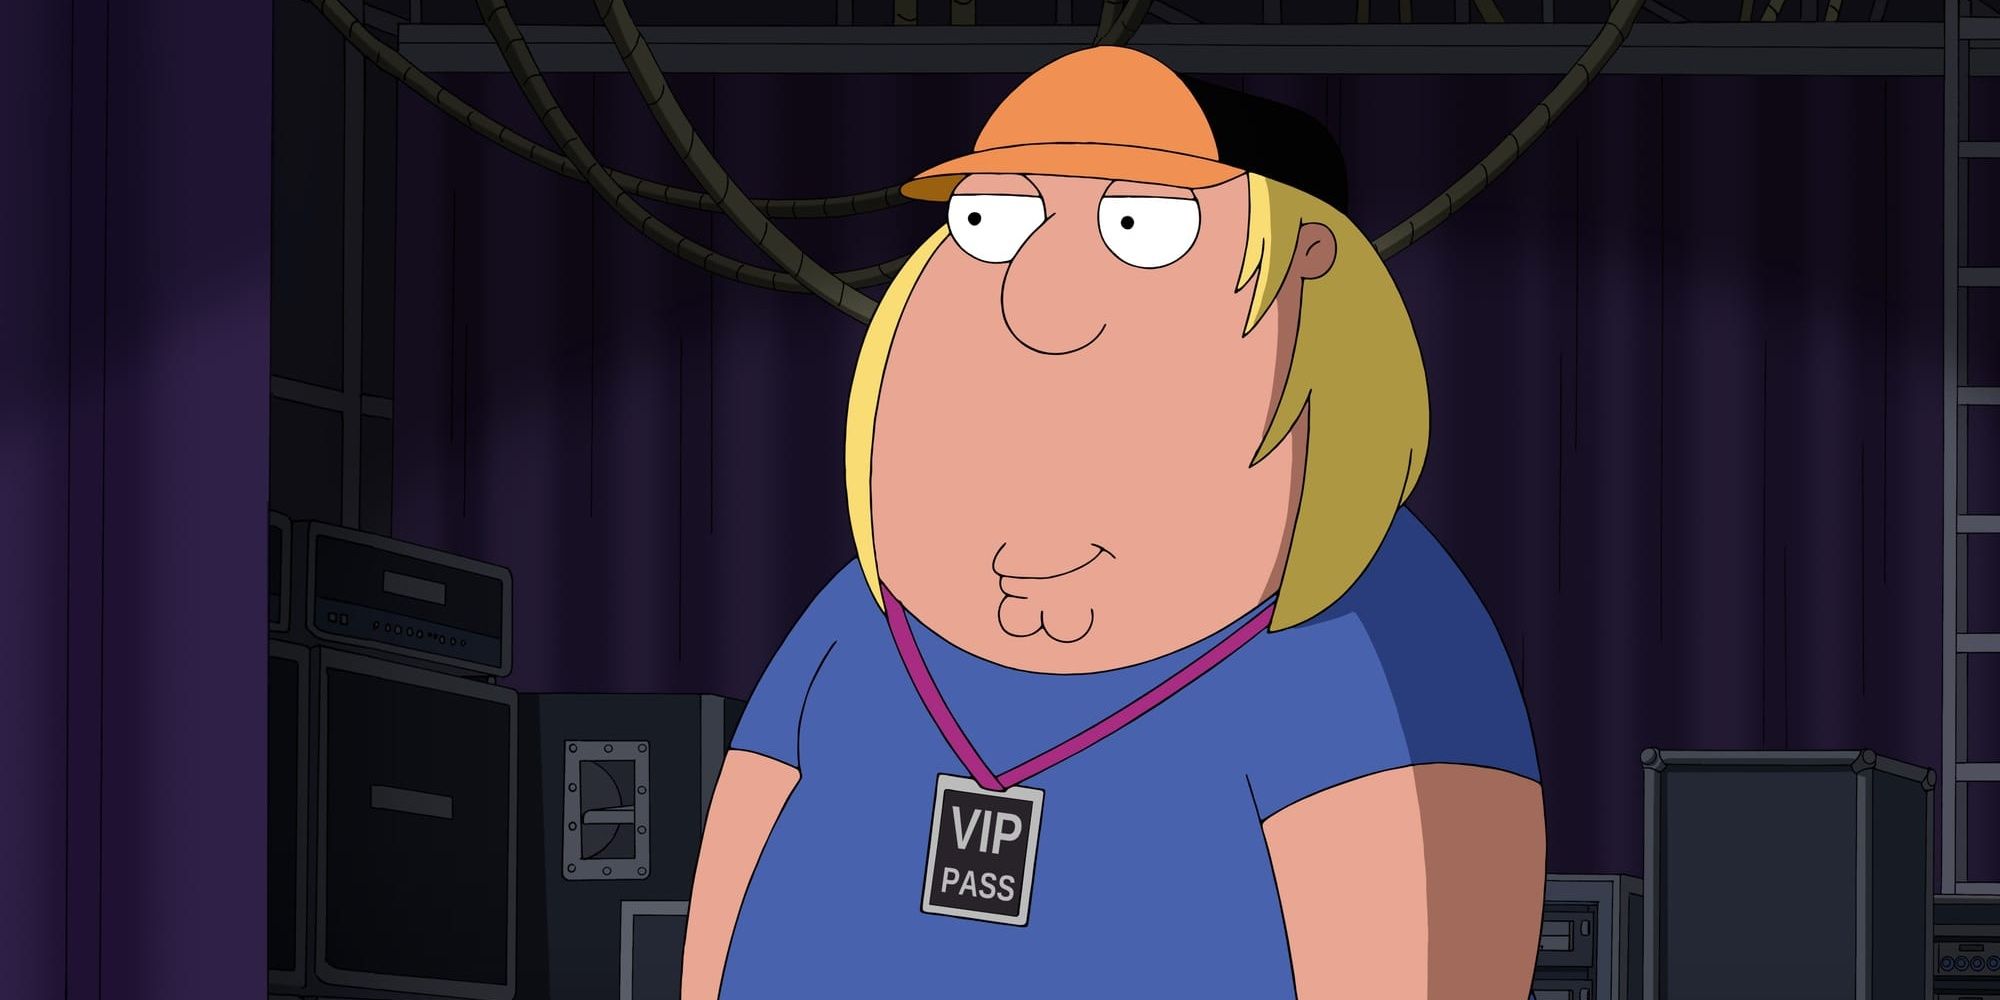 Seth Green character Chris Griffin Family Guy wearing a VIP pass and orange hat